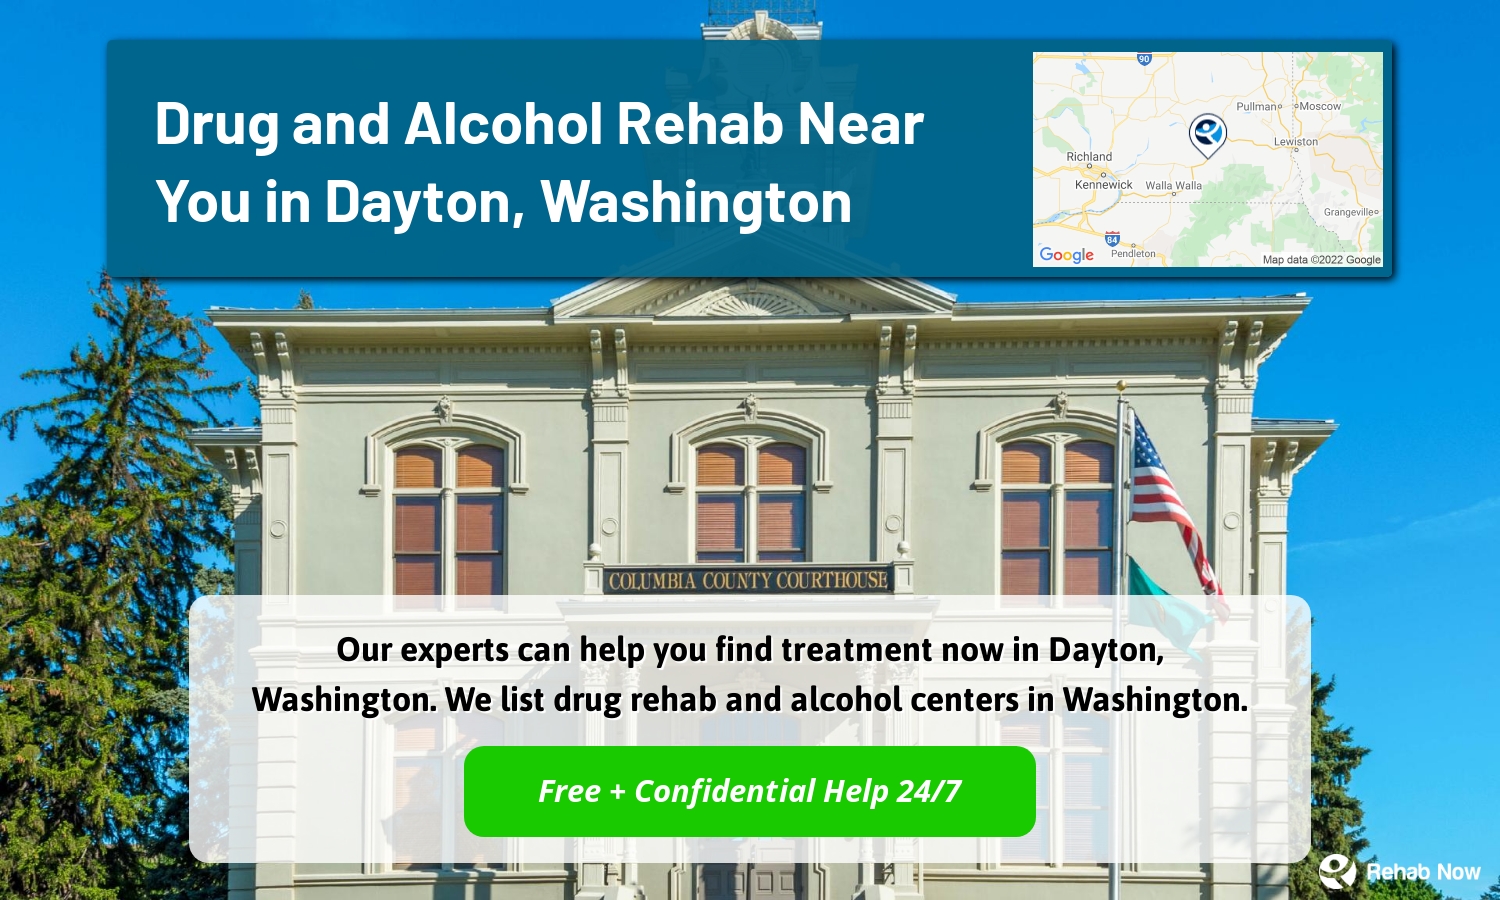 Our experts can help you find treatment now in Dayton, Washington. We list drug rehab and alcohol centers in Washington.